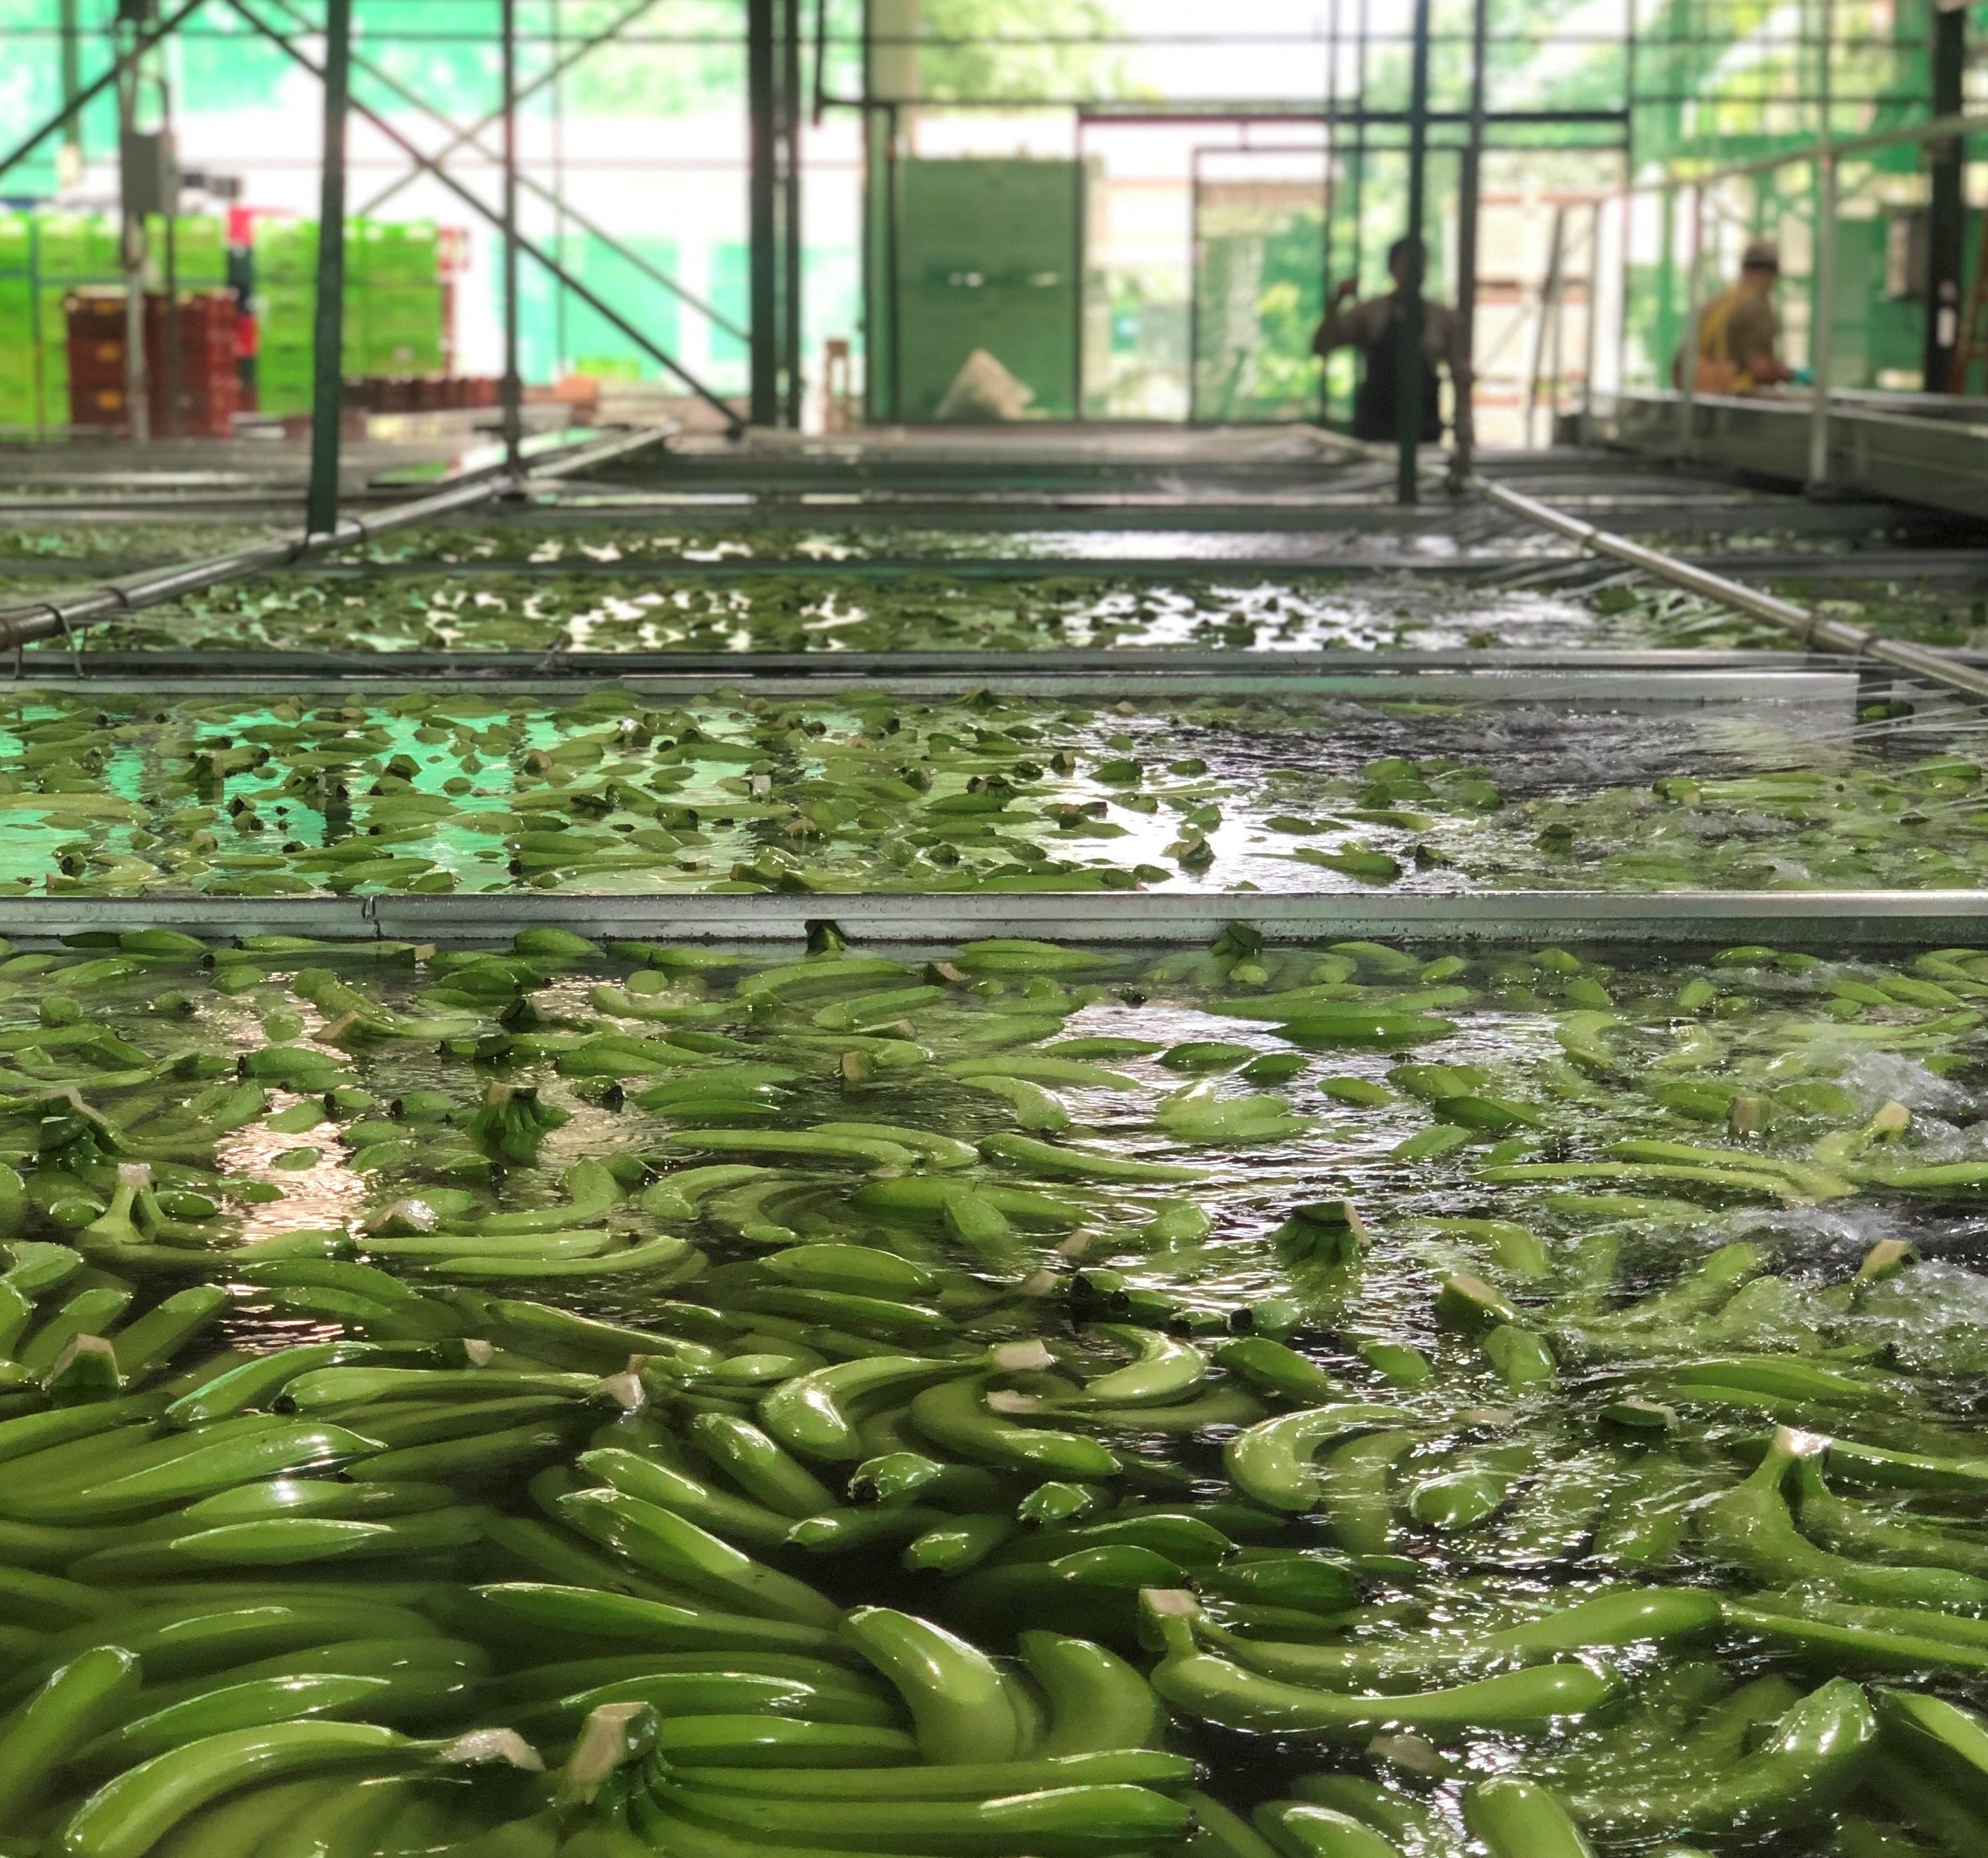 The bananas are conventionally soaked in pesticides during processing to maintain preservation while being shipped. Image by Madison Stewart. Costa Rica, 2019. 